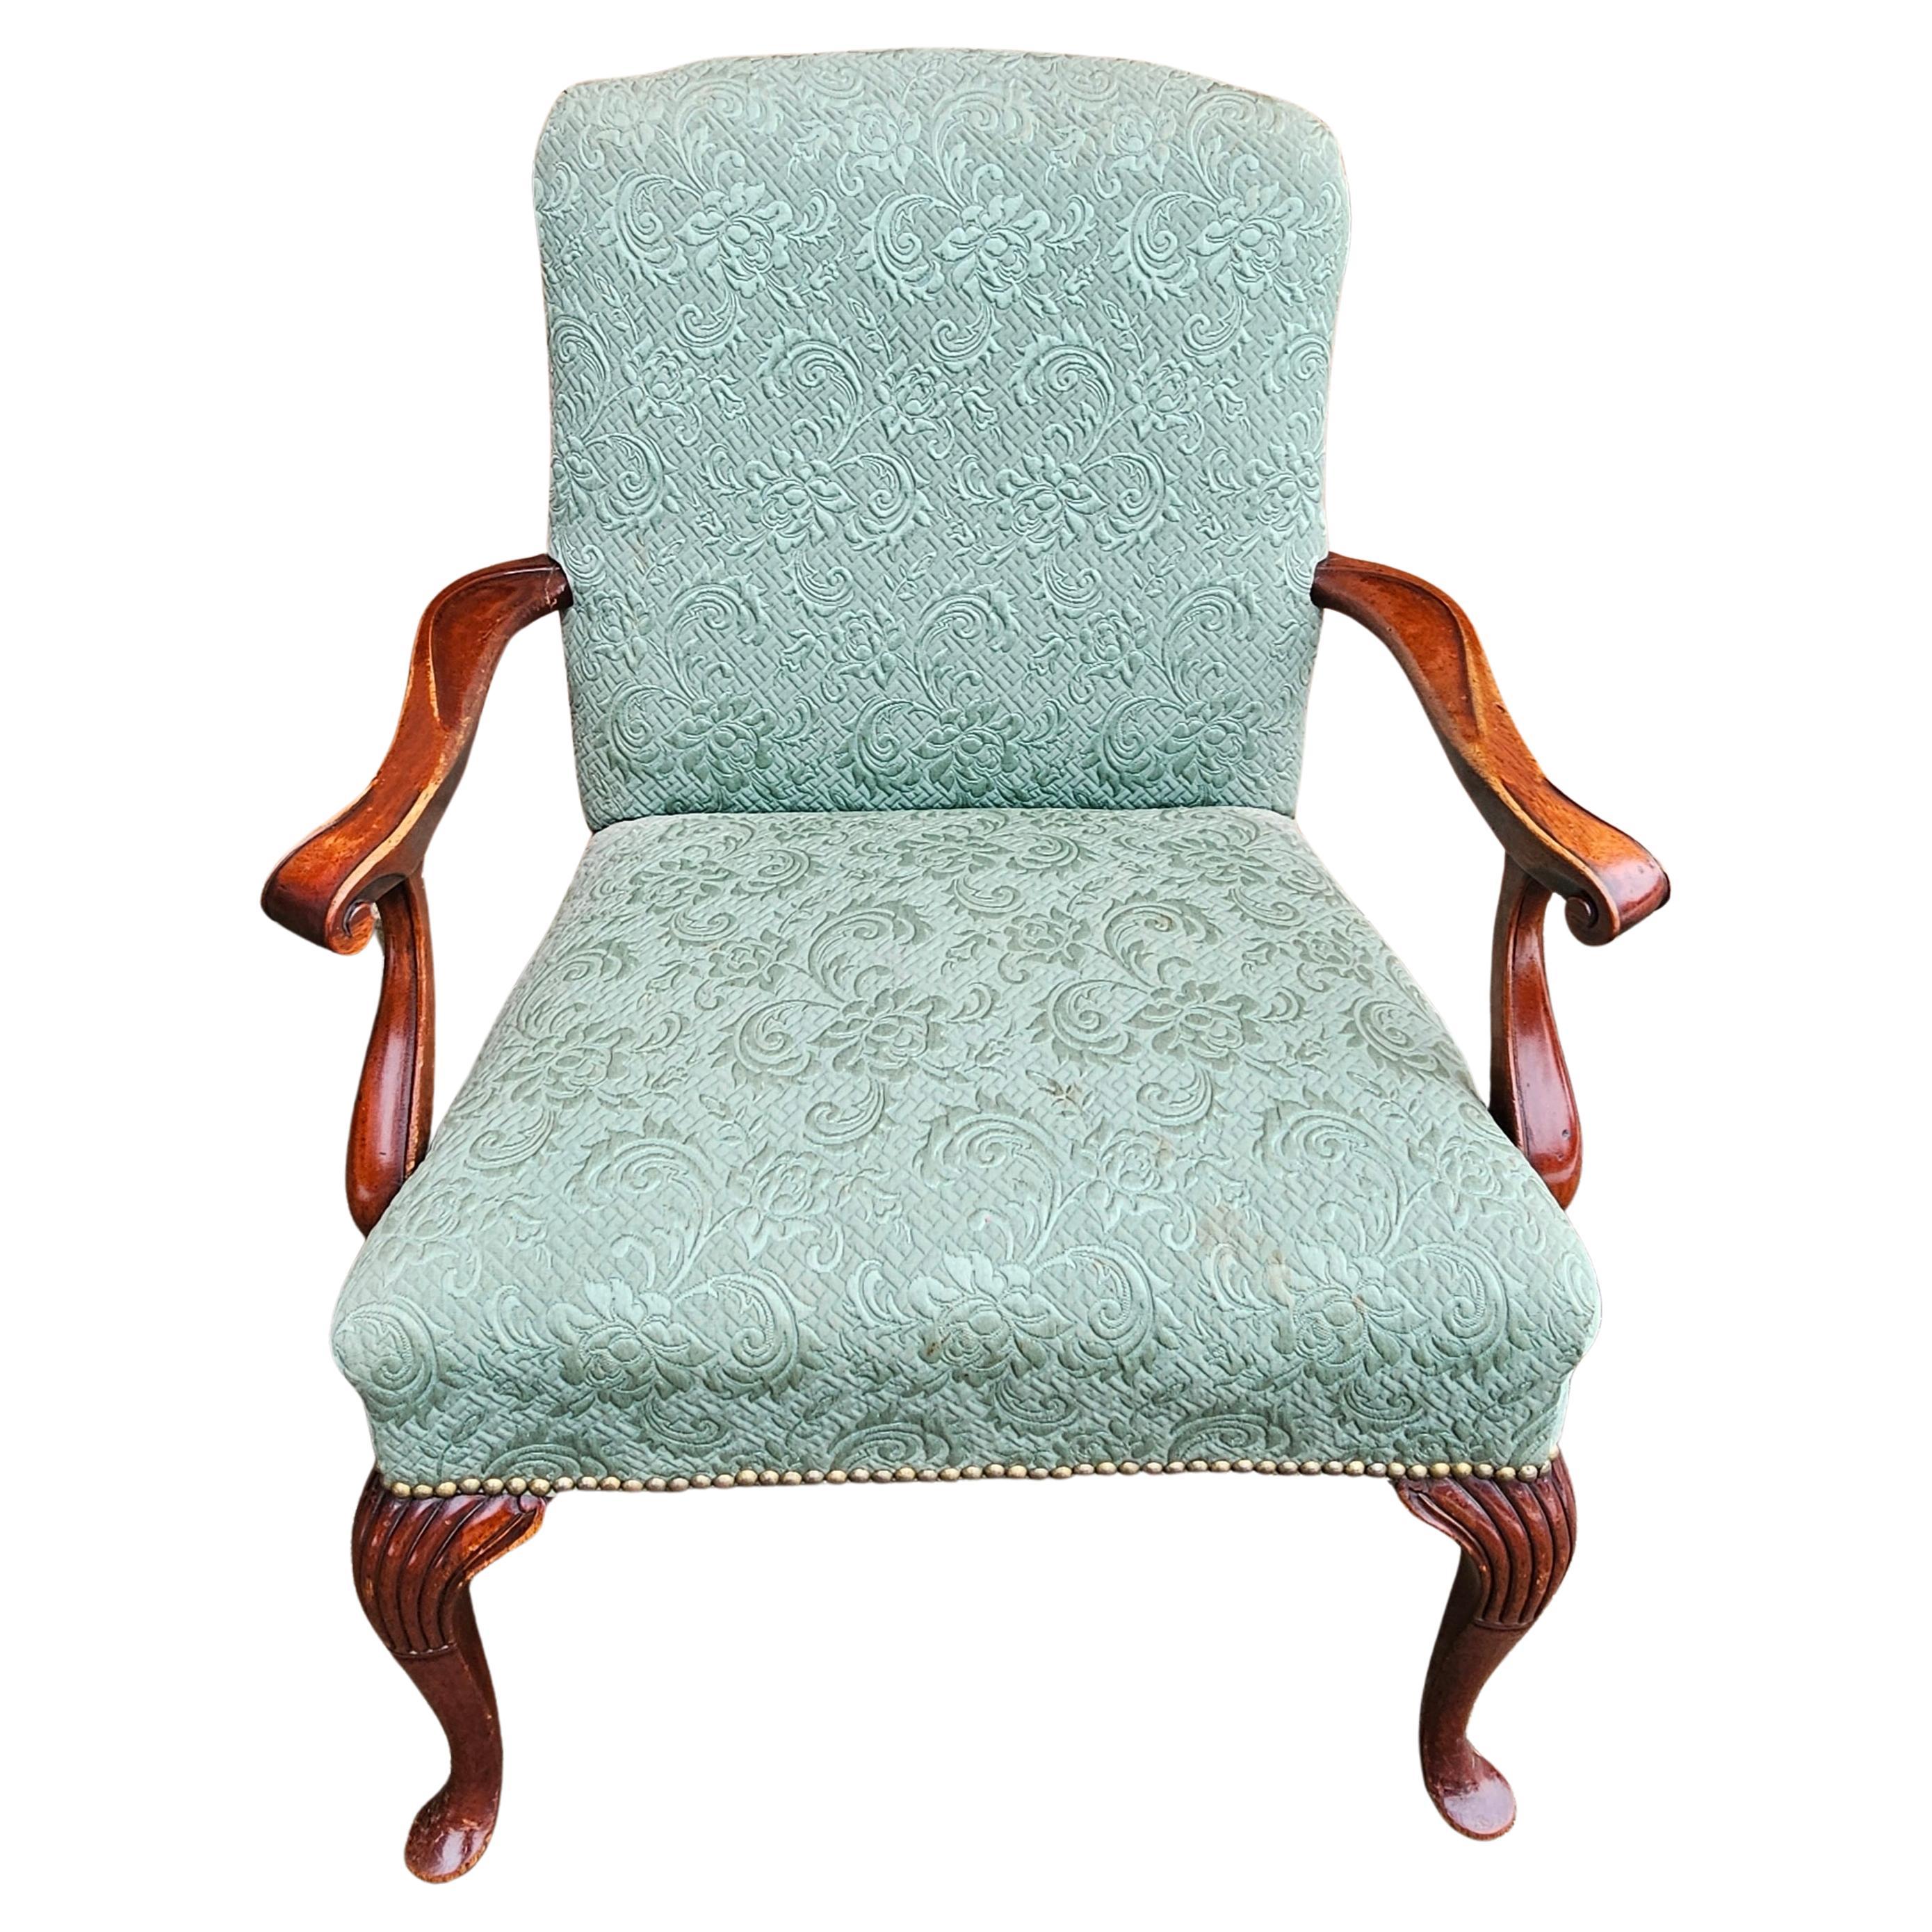 A Mid 20th Century Queen Anne Style Mahogany Upholstered Armchair. Very good vintage condition. Solid upholstery with nail trim line. Measures 28